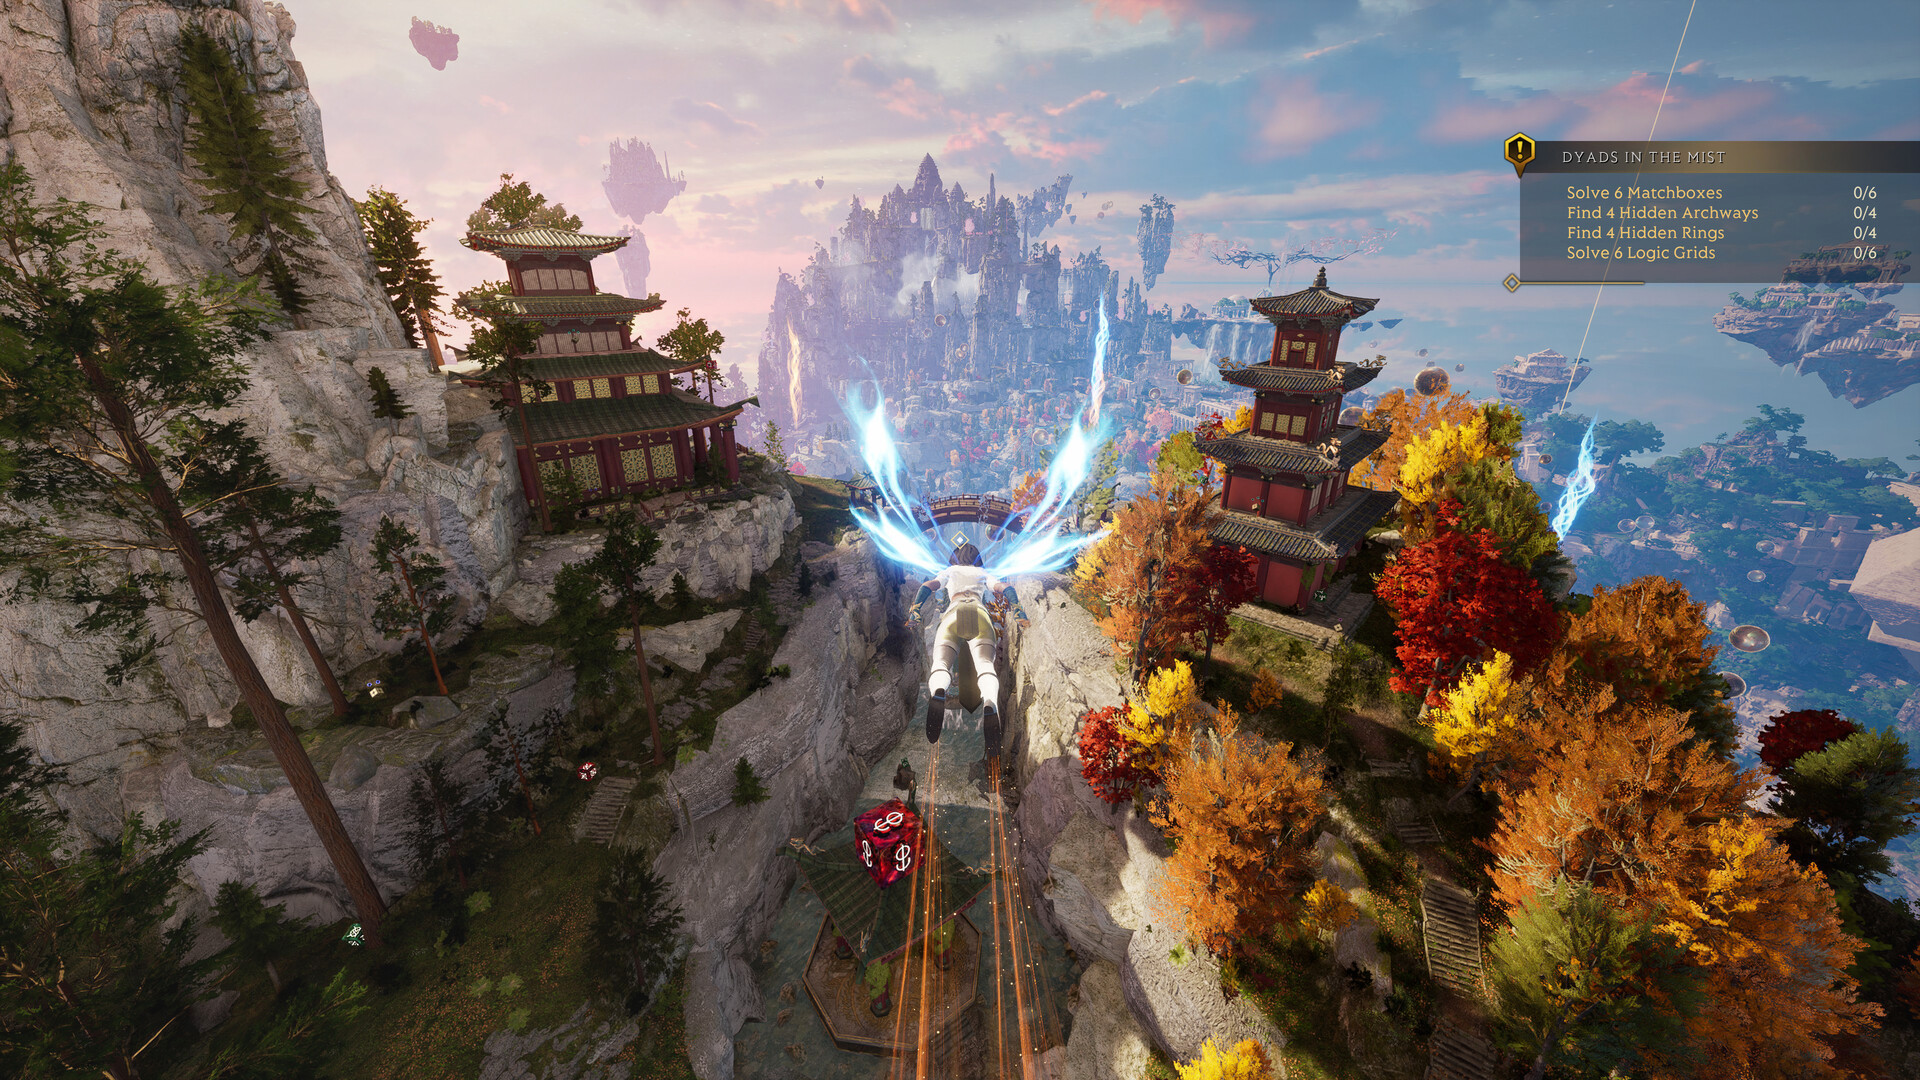 A character flies through the air in Islands of Insight.